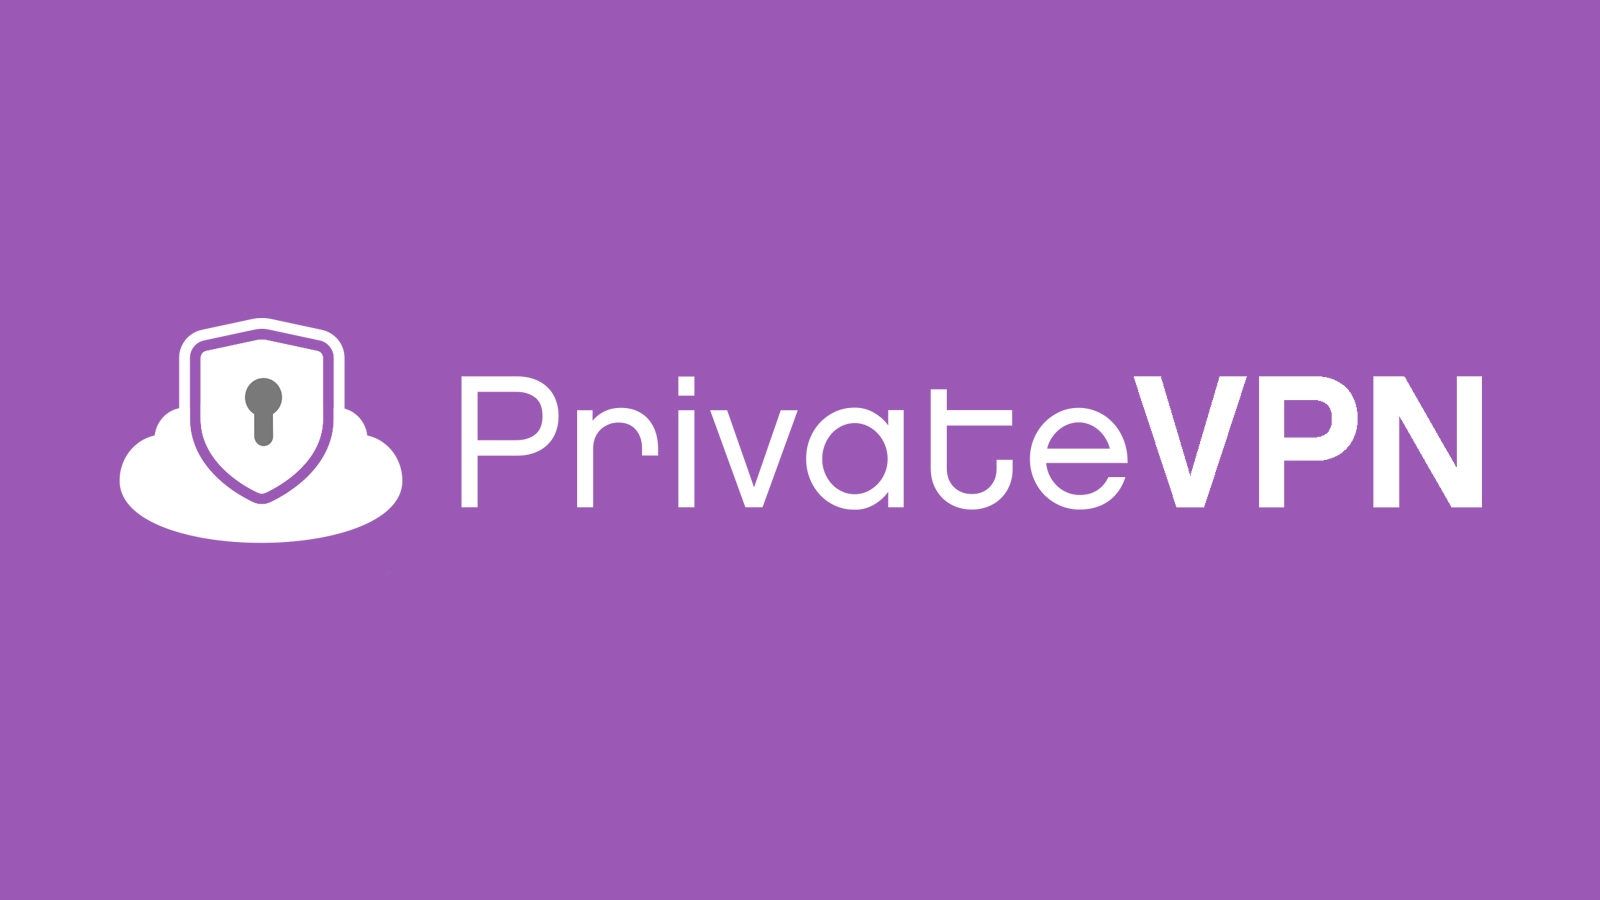 PrivateVPN: Protect Your Online Privacy and Unlock the Internet’s Full Potential